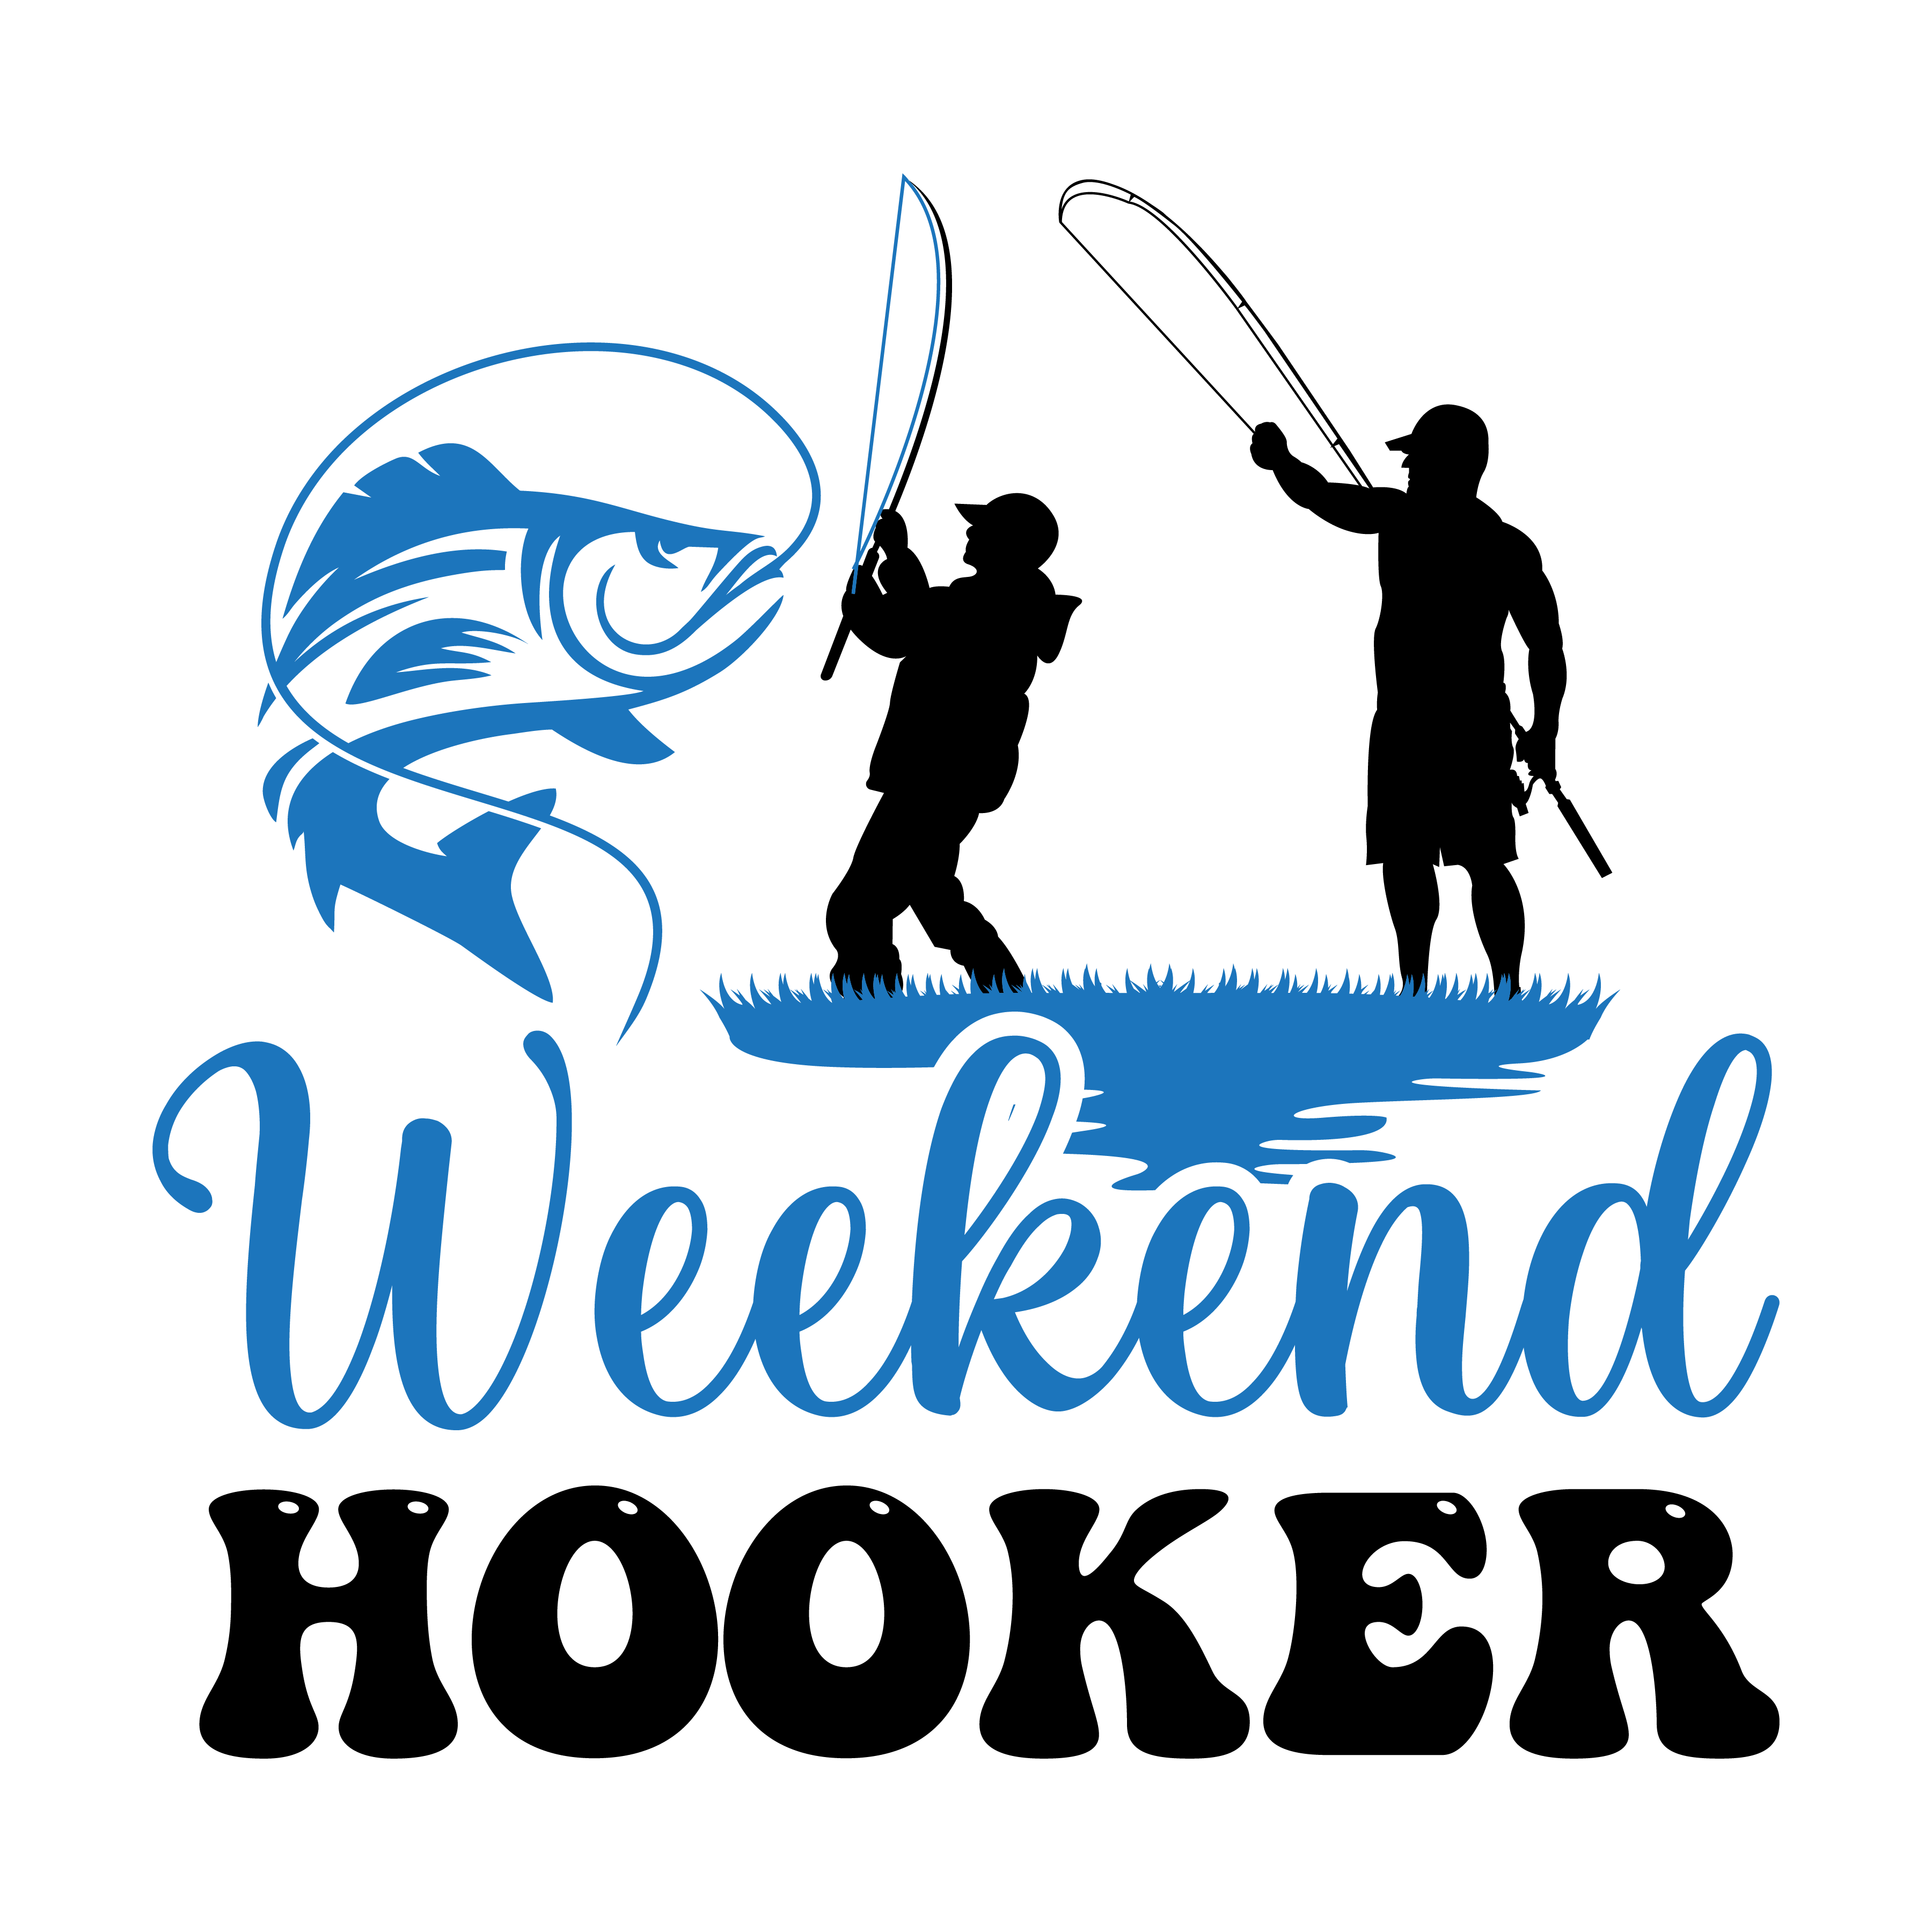 Weekend Hooker ,Fishing quotes, fishing sayings, Cricut designs, free, clip art, svg file, template, pattern, stencil, silhouette, cut file, design space, short, funny, shirt, cup, DIY crafts and projects, embroidery